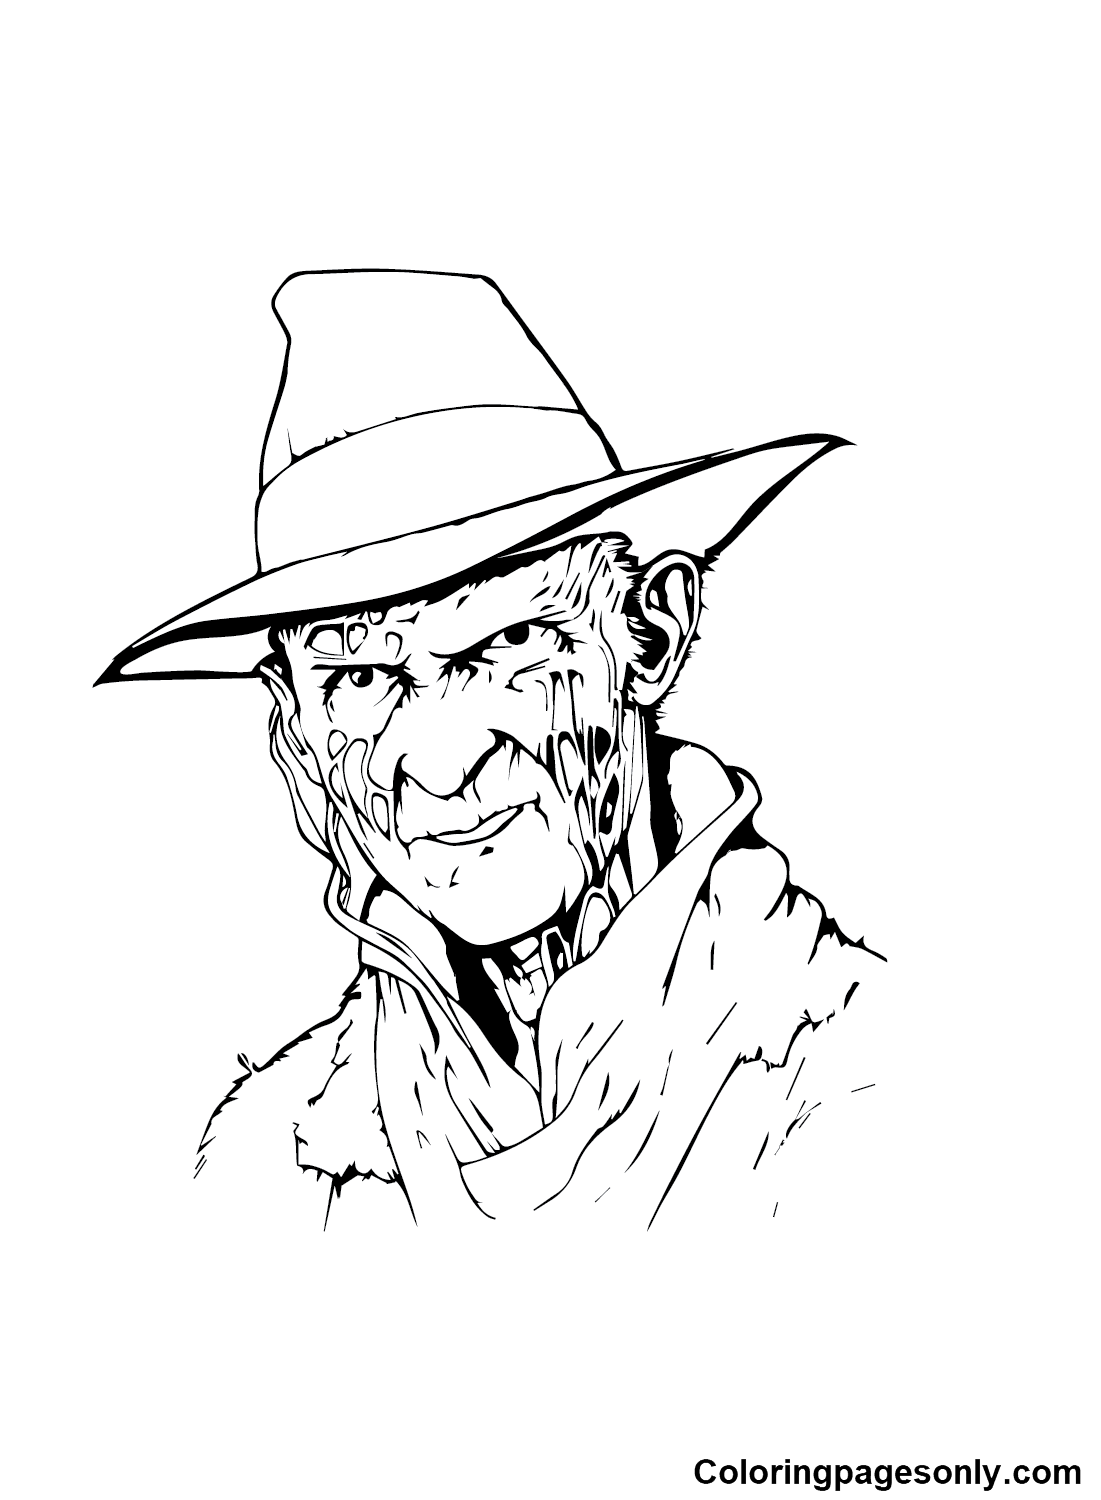 Freddy Krueger Coloring Pages Printable for Free Download